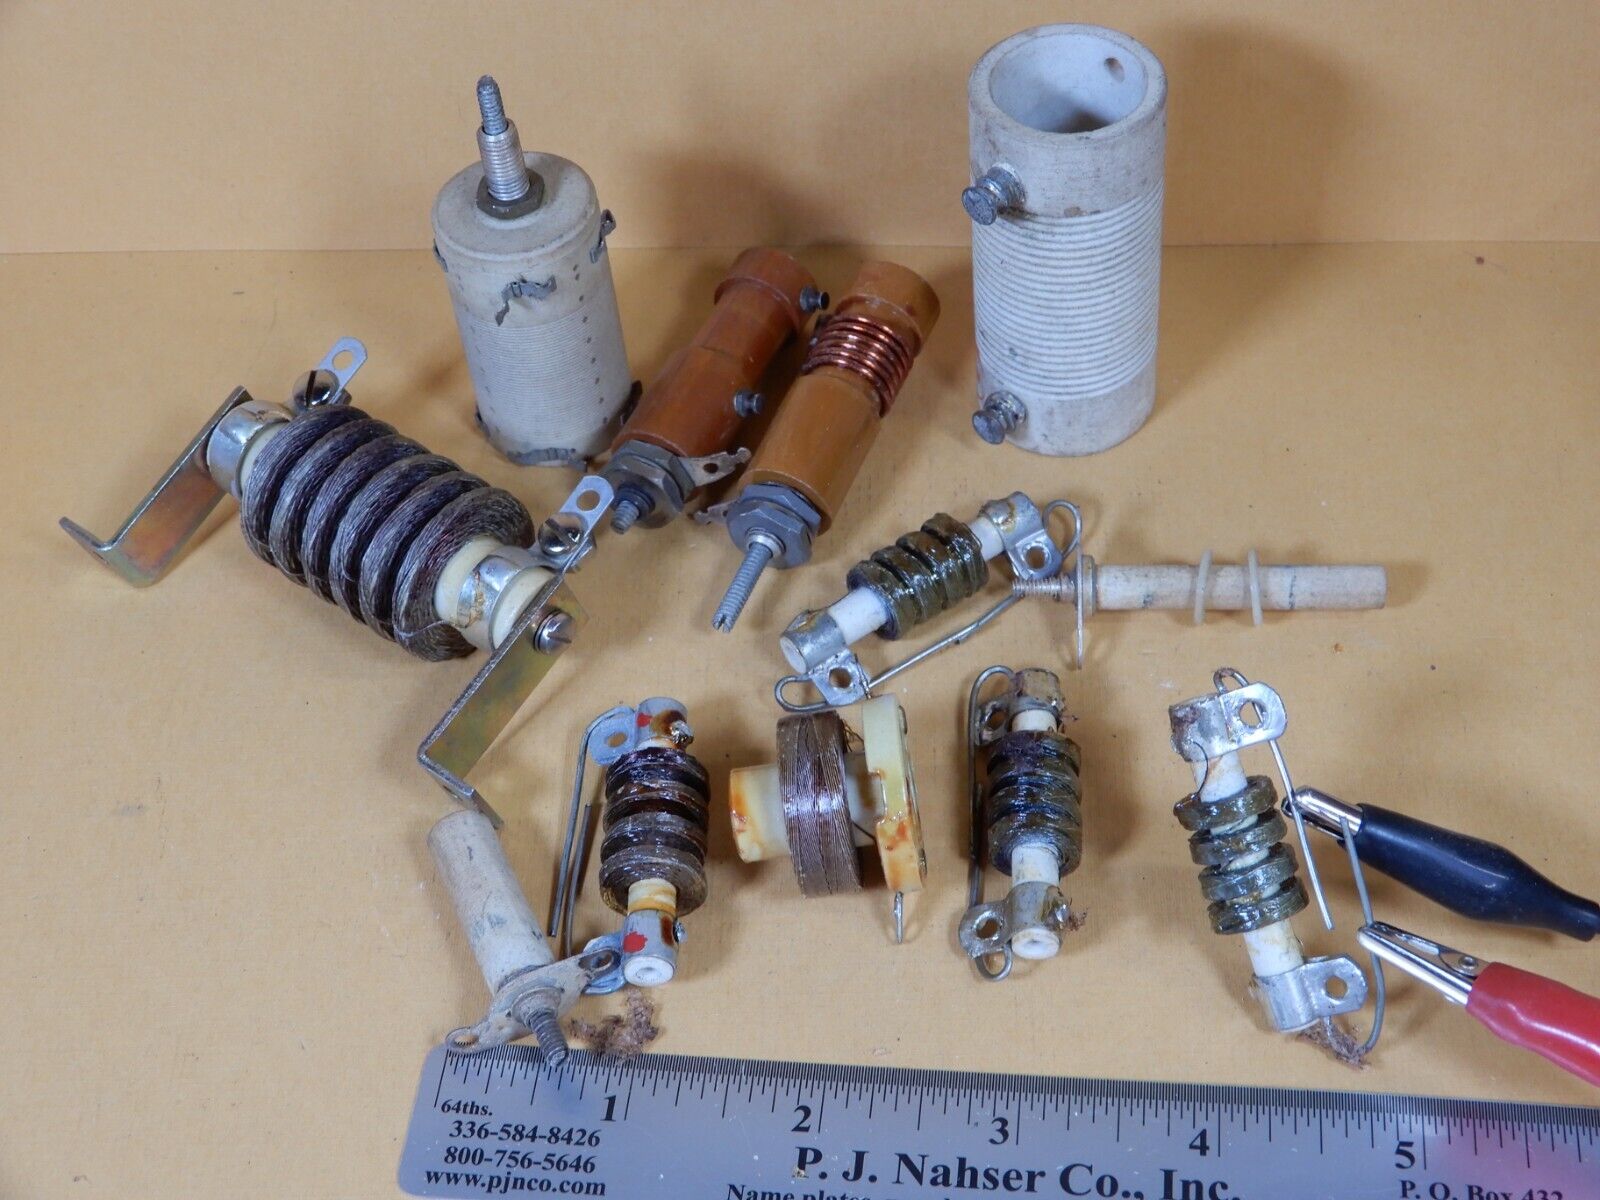 Lot of Vintage RF Radio Chokes and Coils Shown